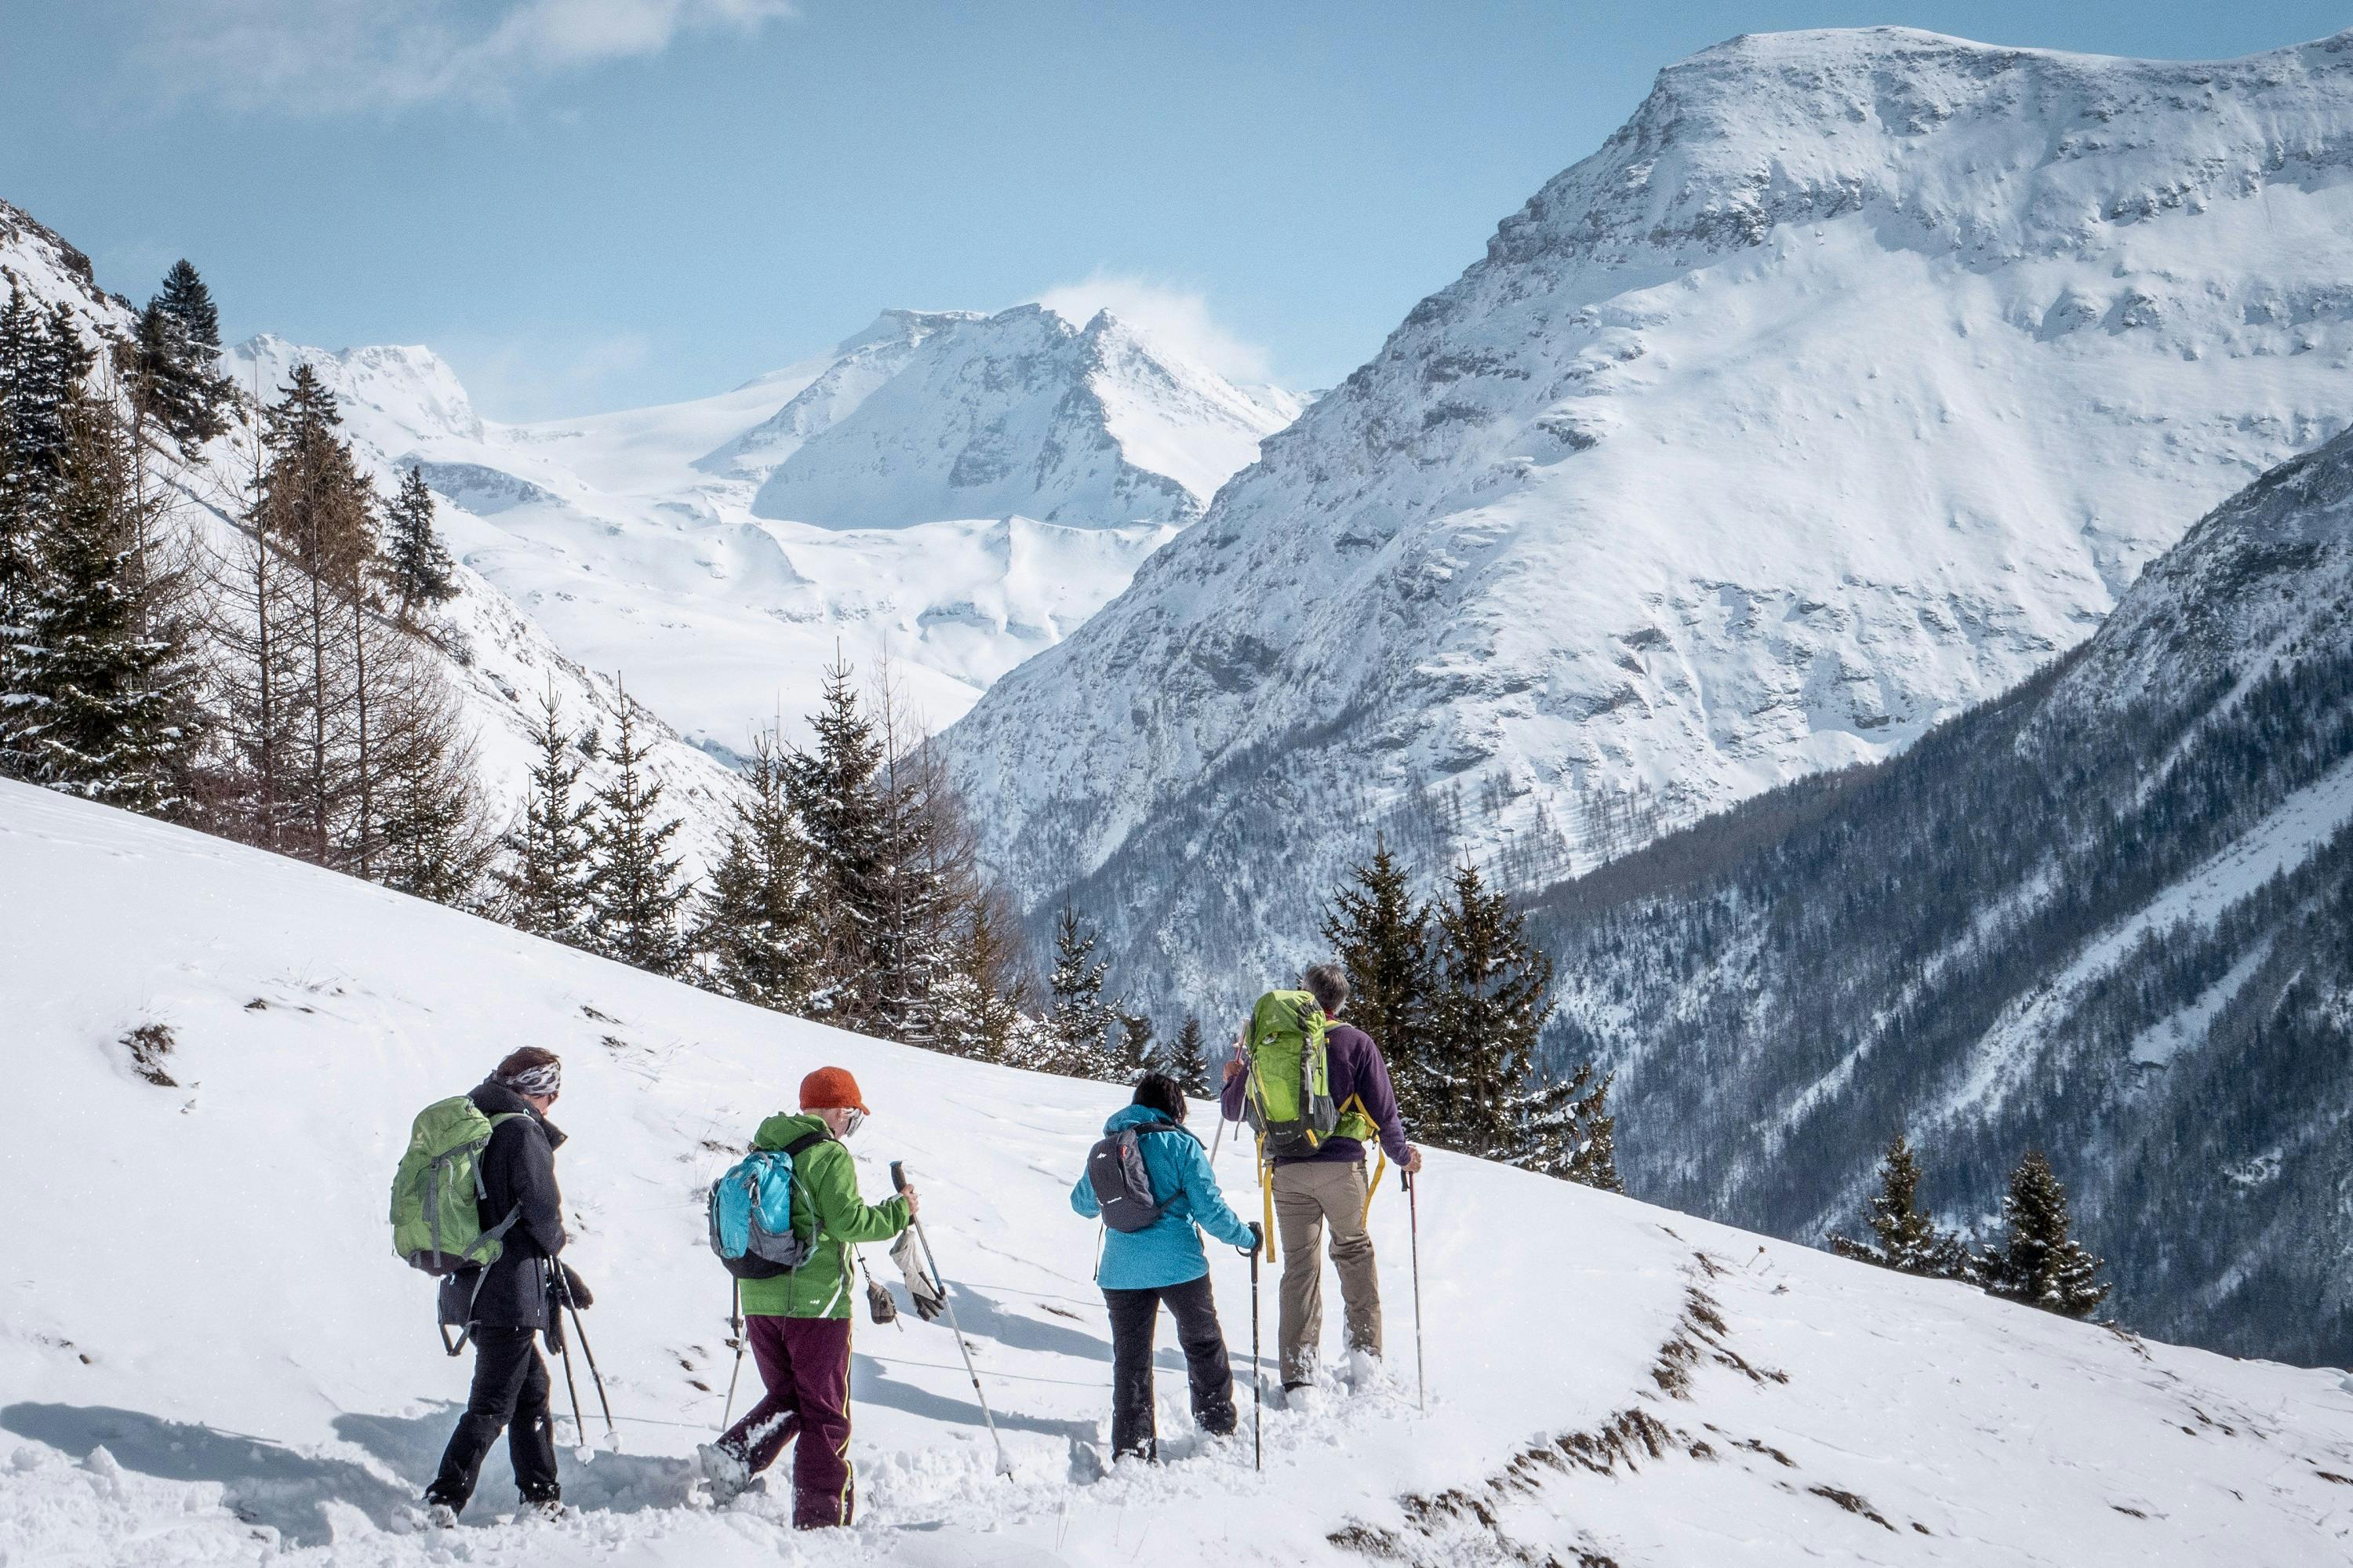 Group of friends snow shoe hiking across snowy mountain in Val Cenis ski resort